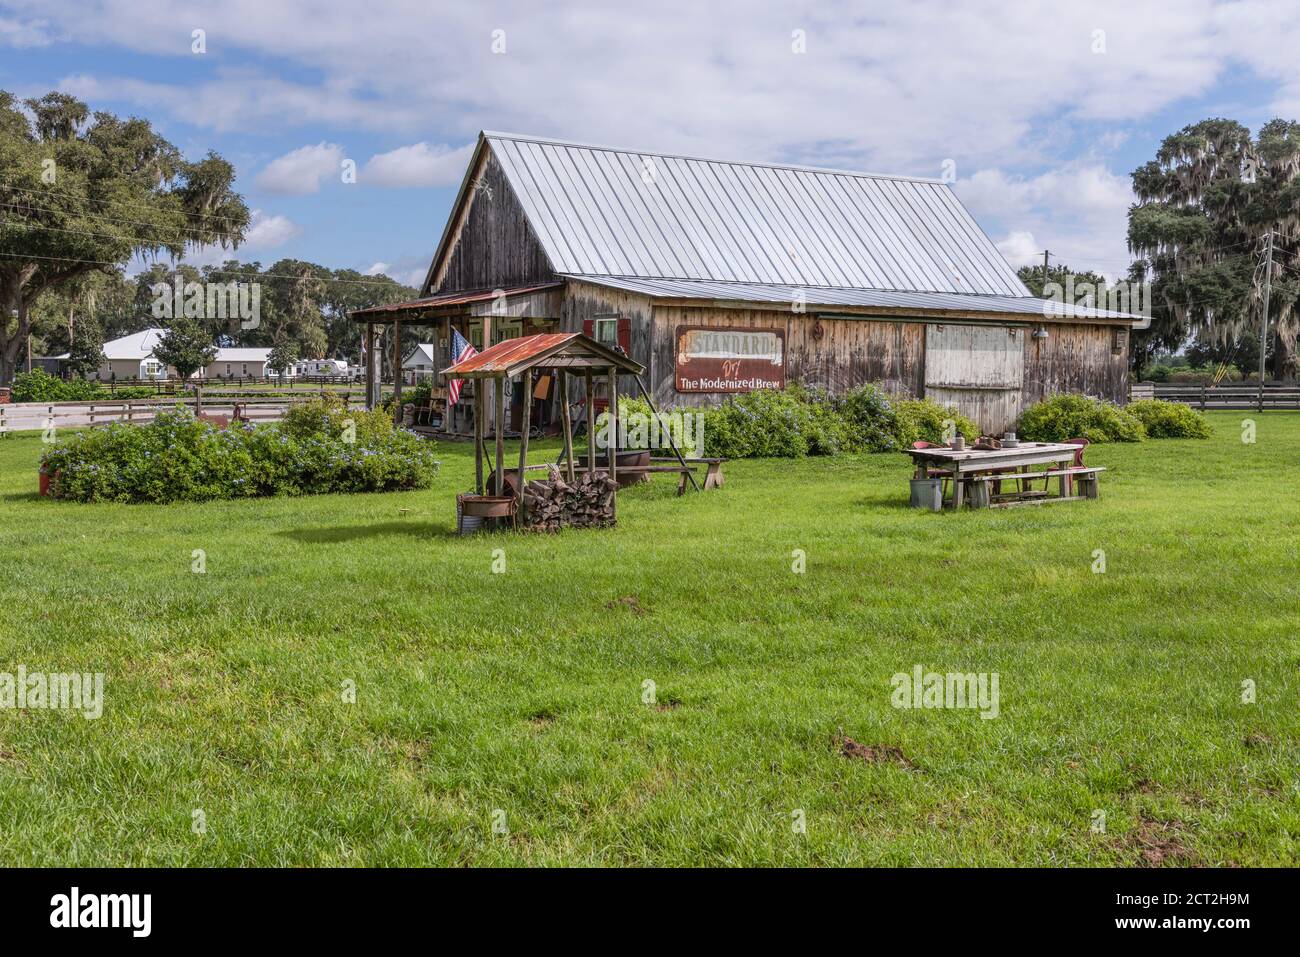 Old Farm Cracker House located in Weirsdale, Florida USA Stock Photo